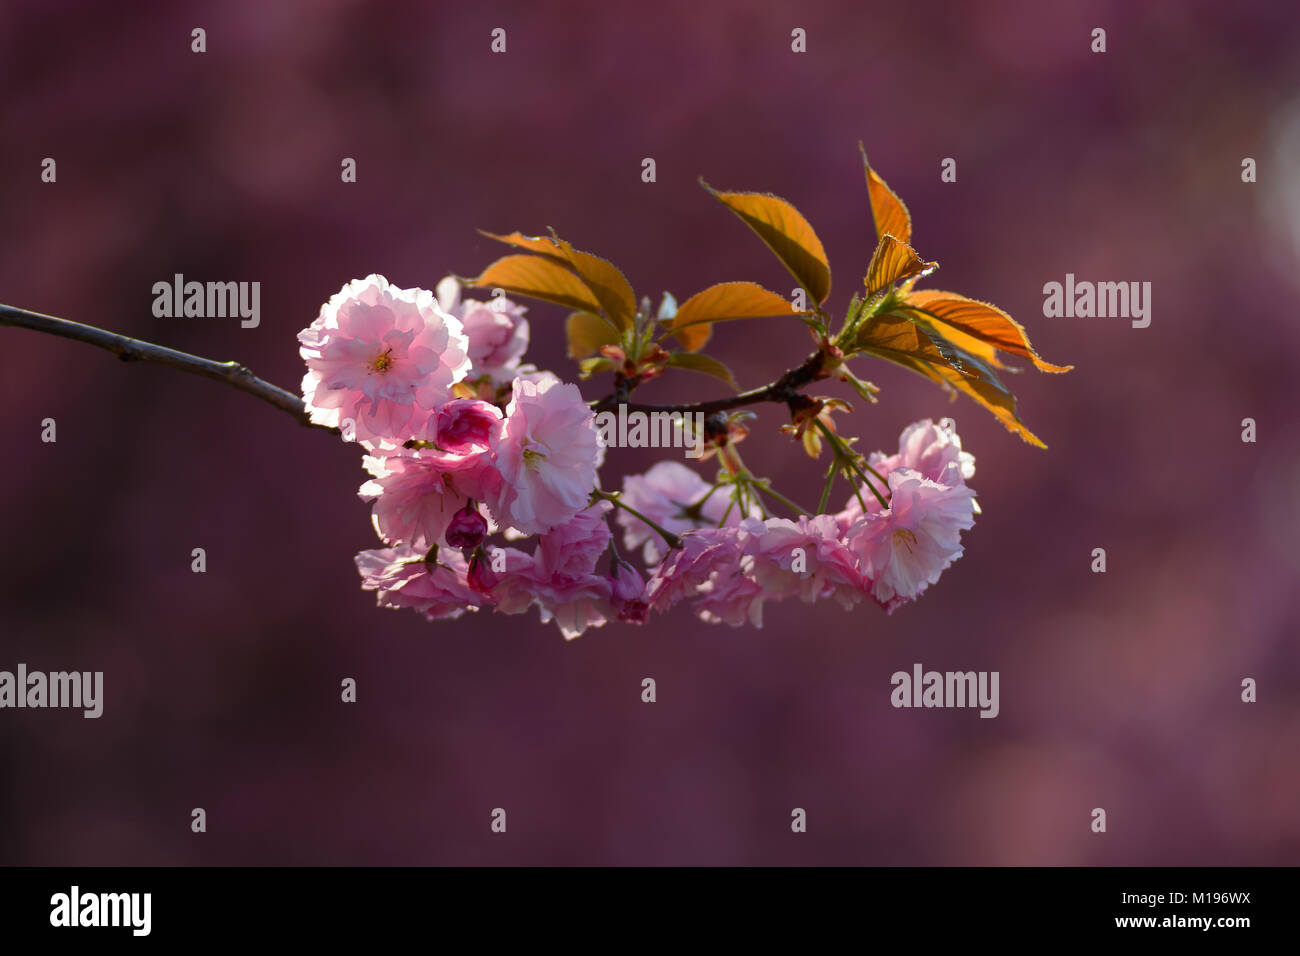 Sakura pink flowers bunch on a branch against blurred background Stock Photo